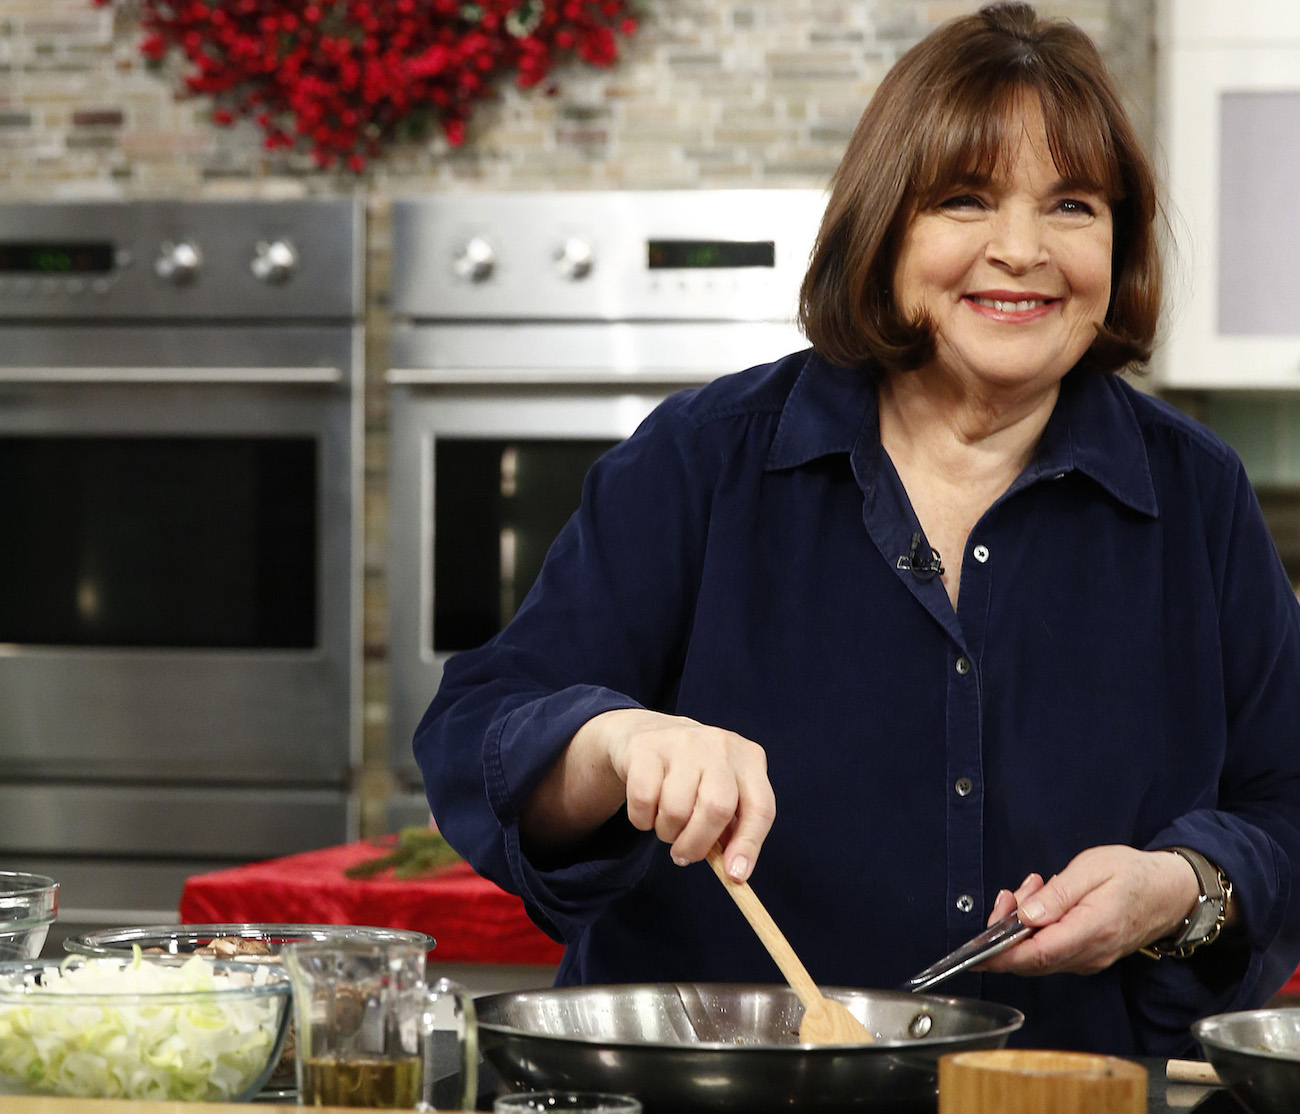 Ina Garten stirs with a wooden spoon wearing a blue button-down shirt wearing a